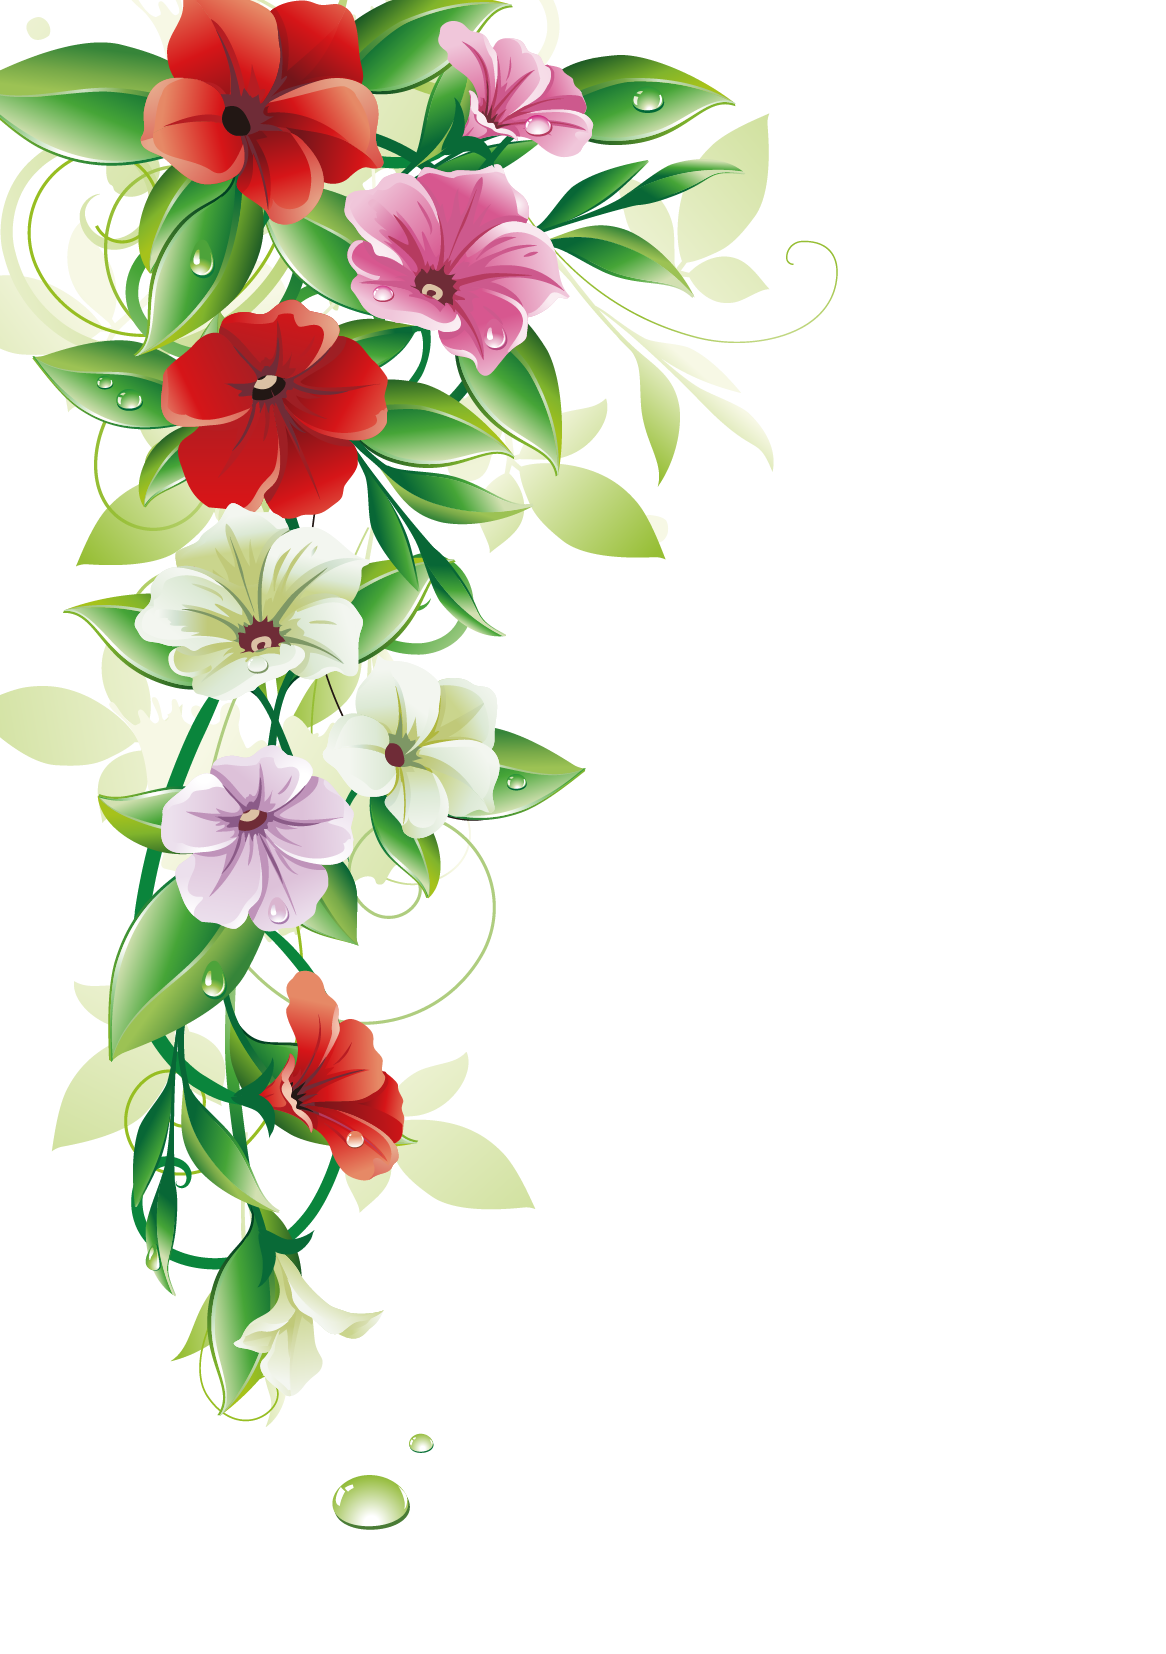 Flower Border Free Photo PNG PNG Image